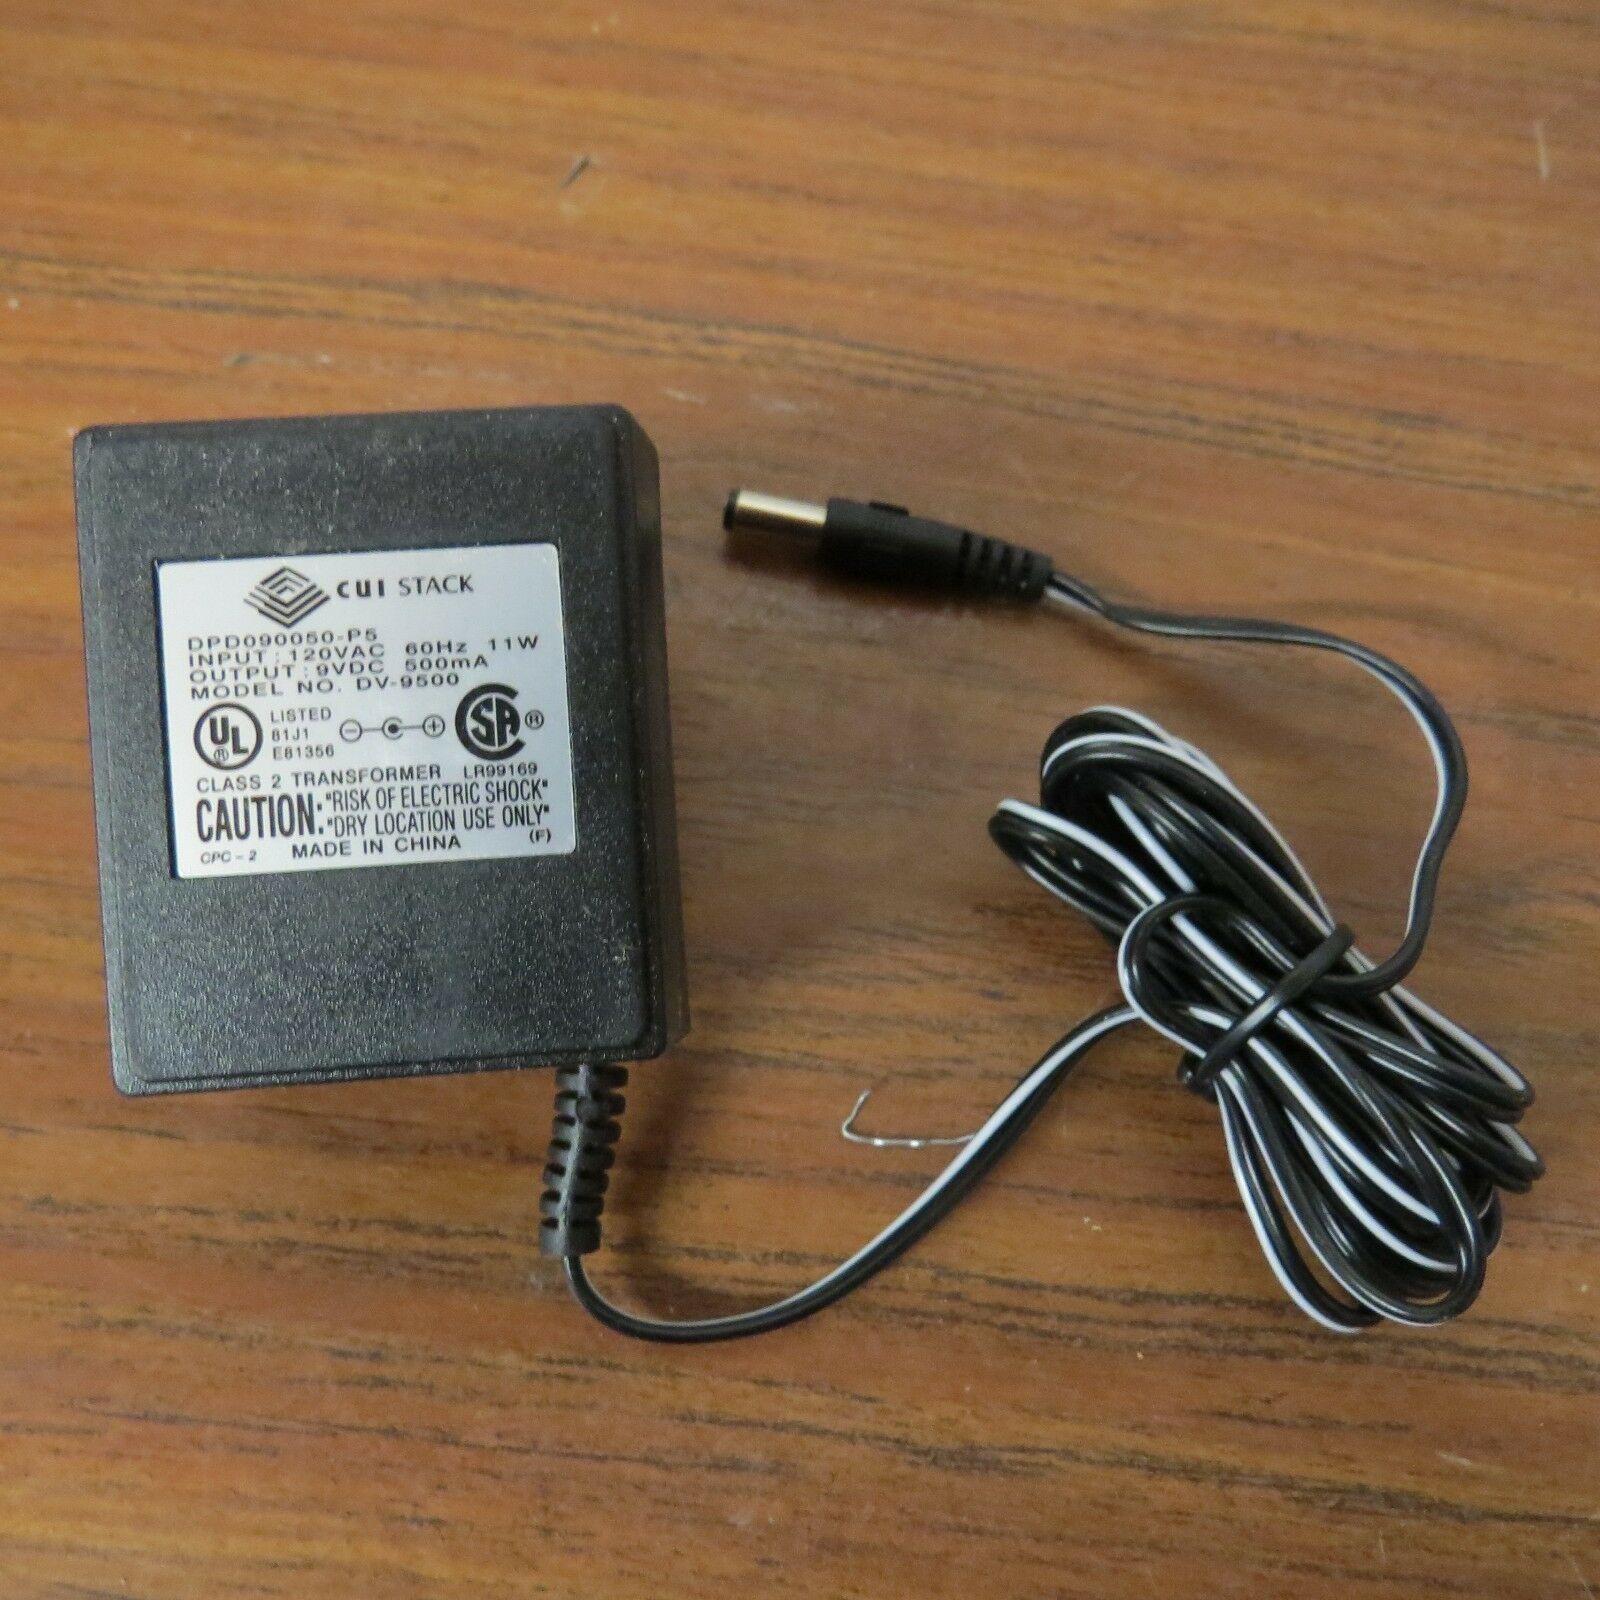 + CUI STACK POWER ADAPTER MODEL DPD120050-P5 Model: DPD1200500-P5 MPN: Does Not Apply Country/Region of Manufactur